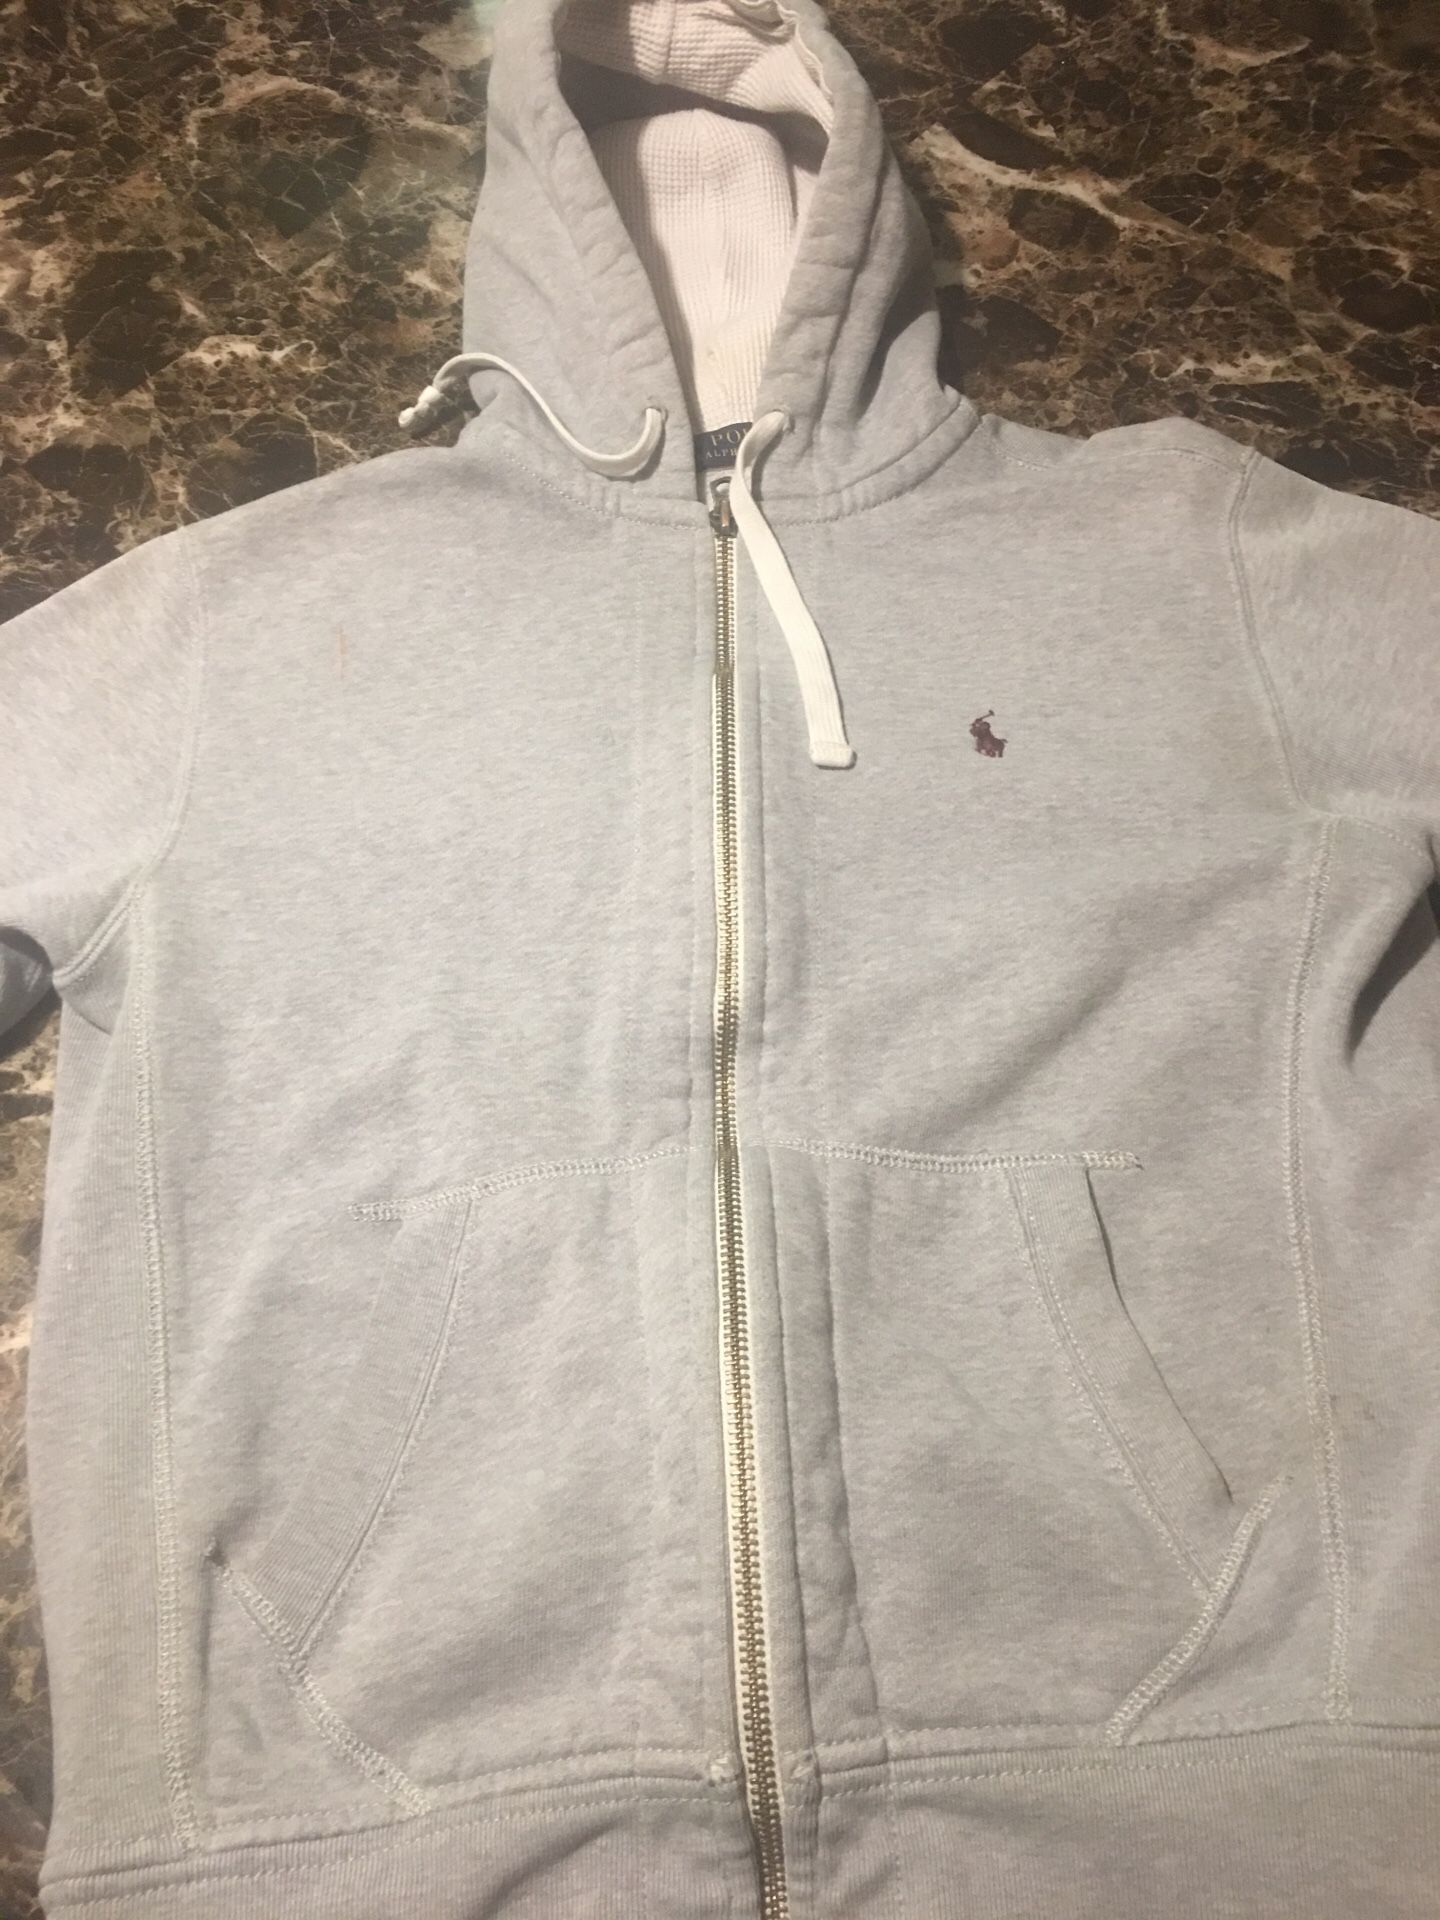 Polo jacket for sale ( might trade for real Gucci headband)